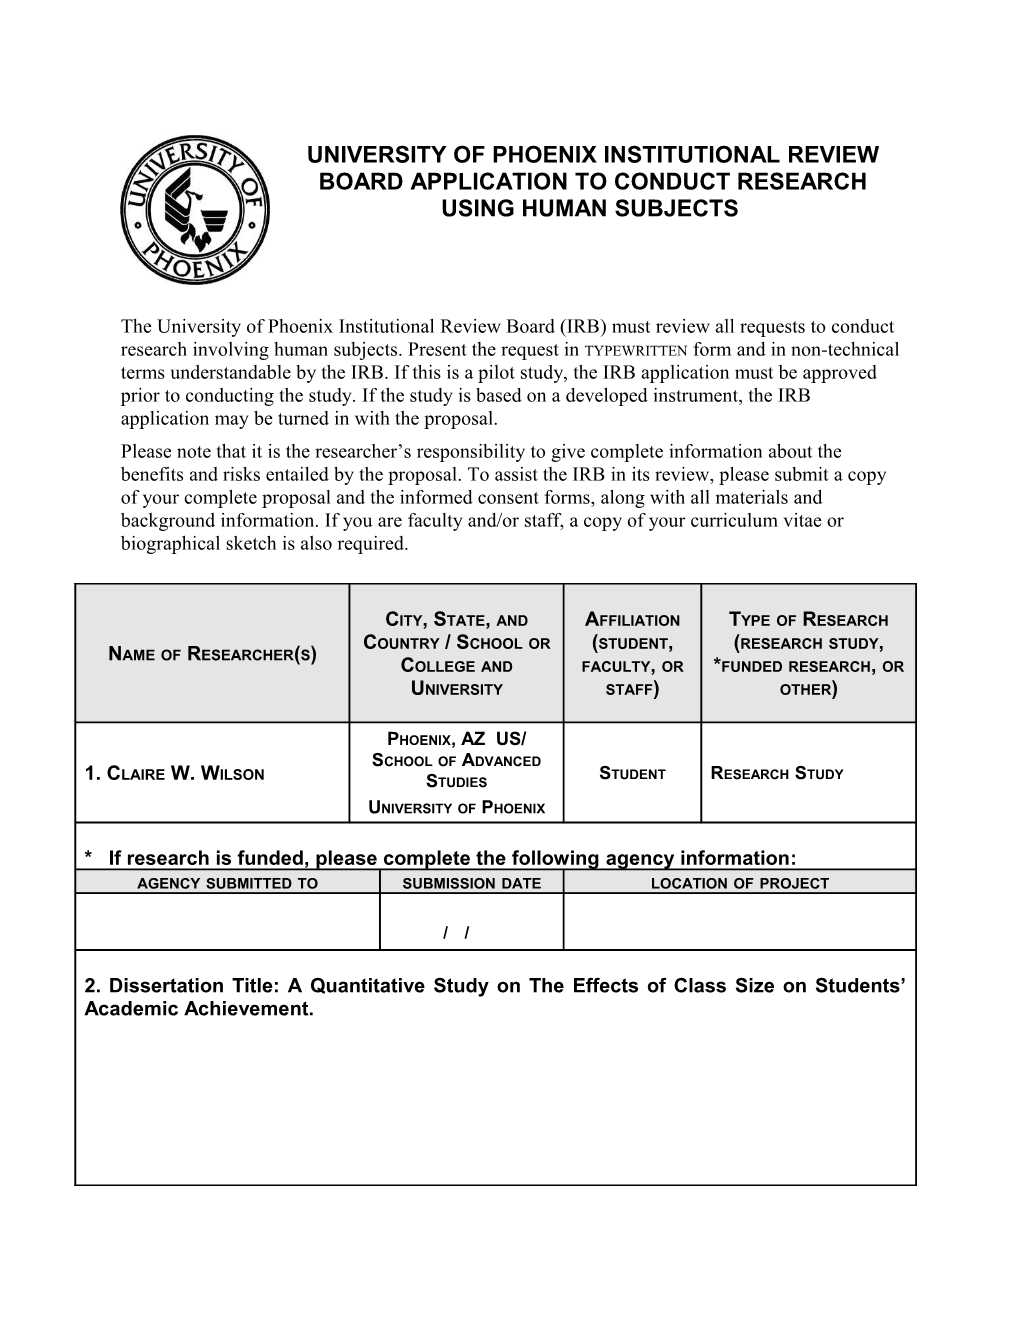 University of Phoenix Institutional Review Board Application to Conduct Research Using